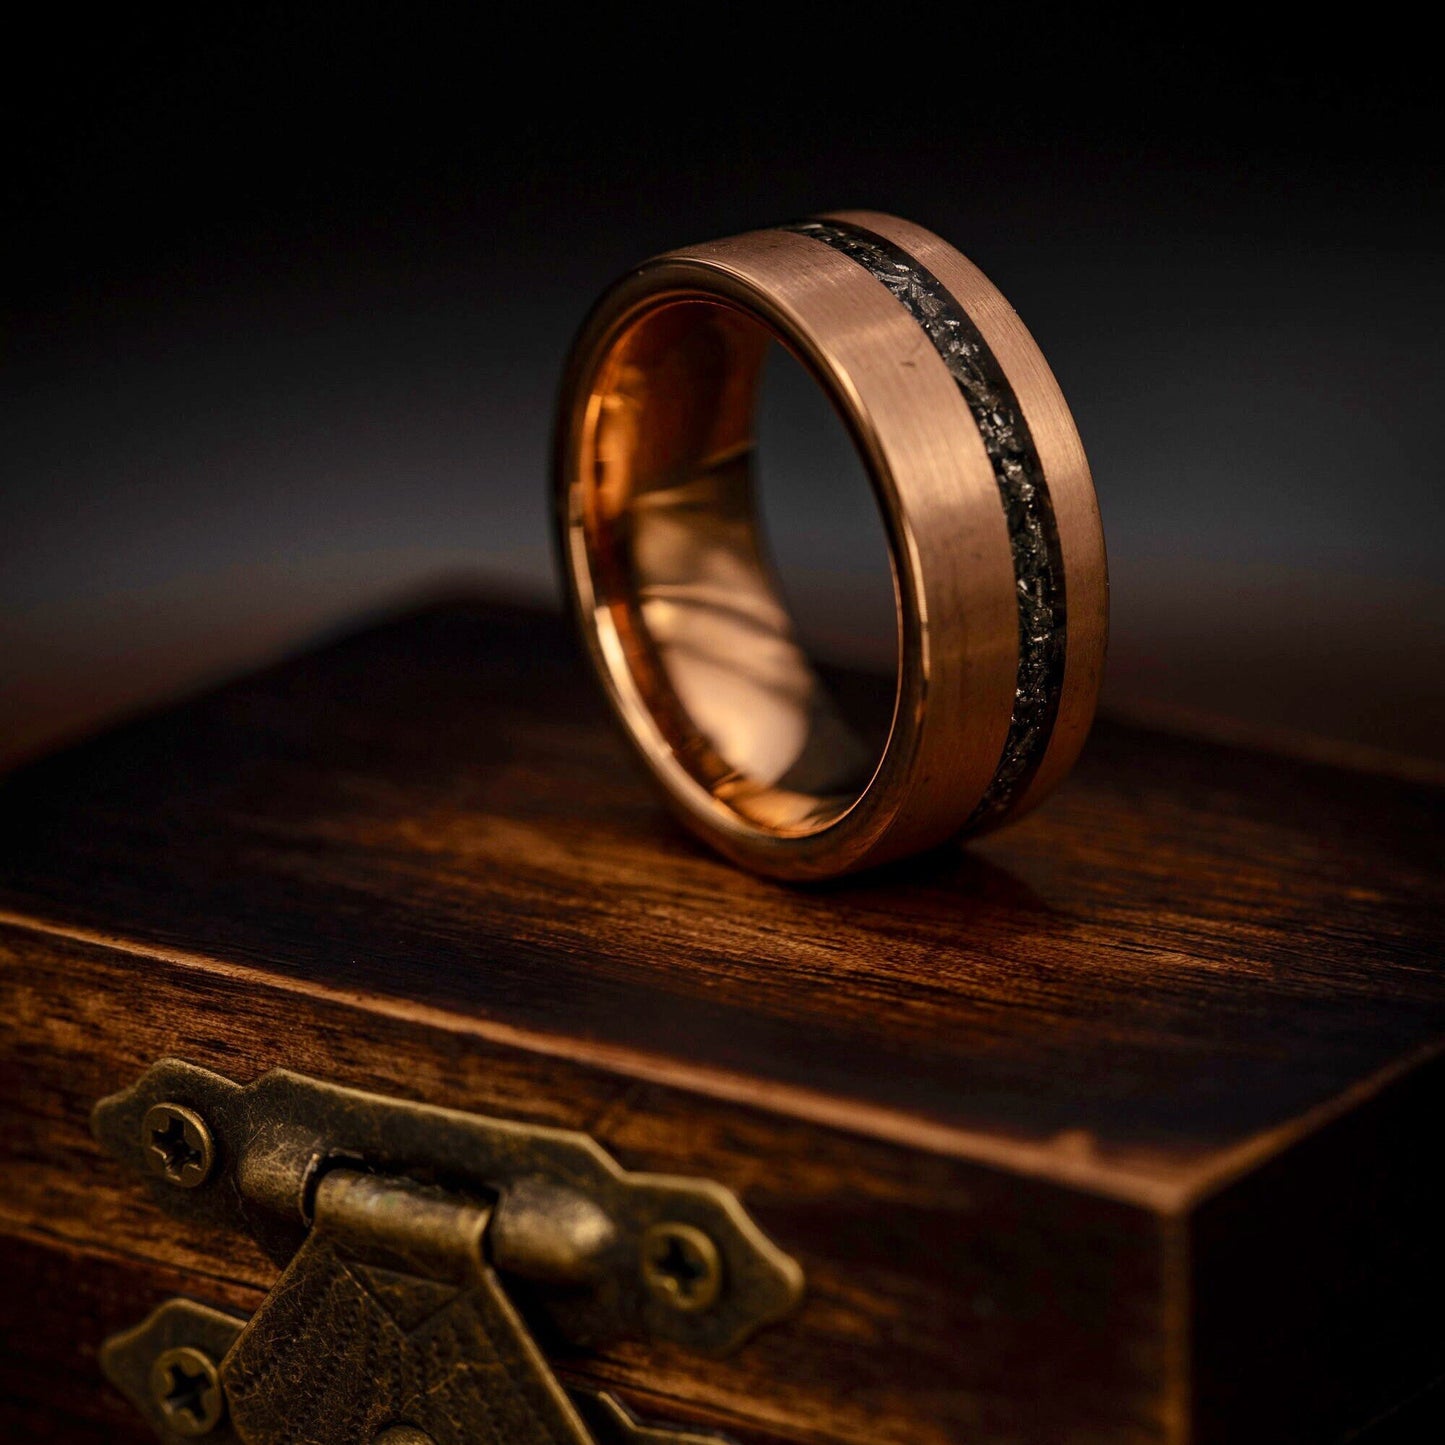 Stylish men's wedding ring crafted from rose gold with real meteorite detailing.